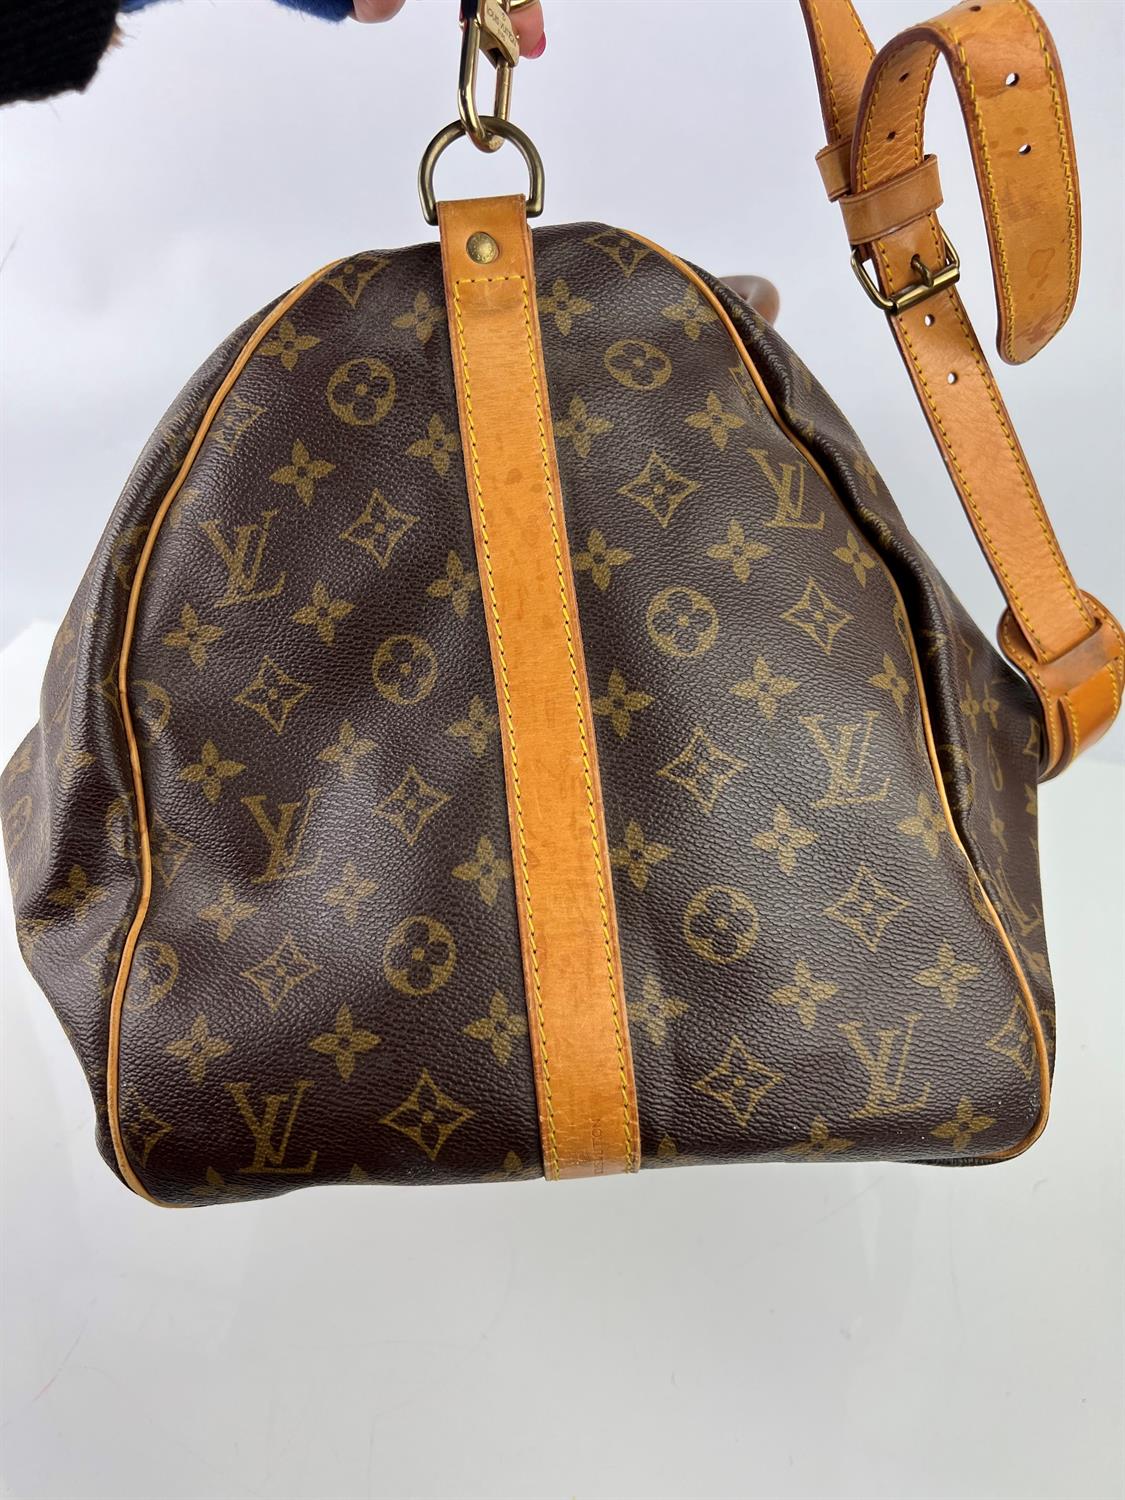 LOUIS VUITTON Monogram Keepall Bandouliere 60 Boston Travel bag with long strap and luggage tag. - Image 4 of 6